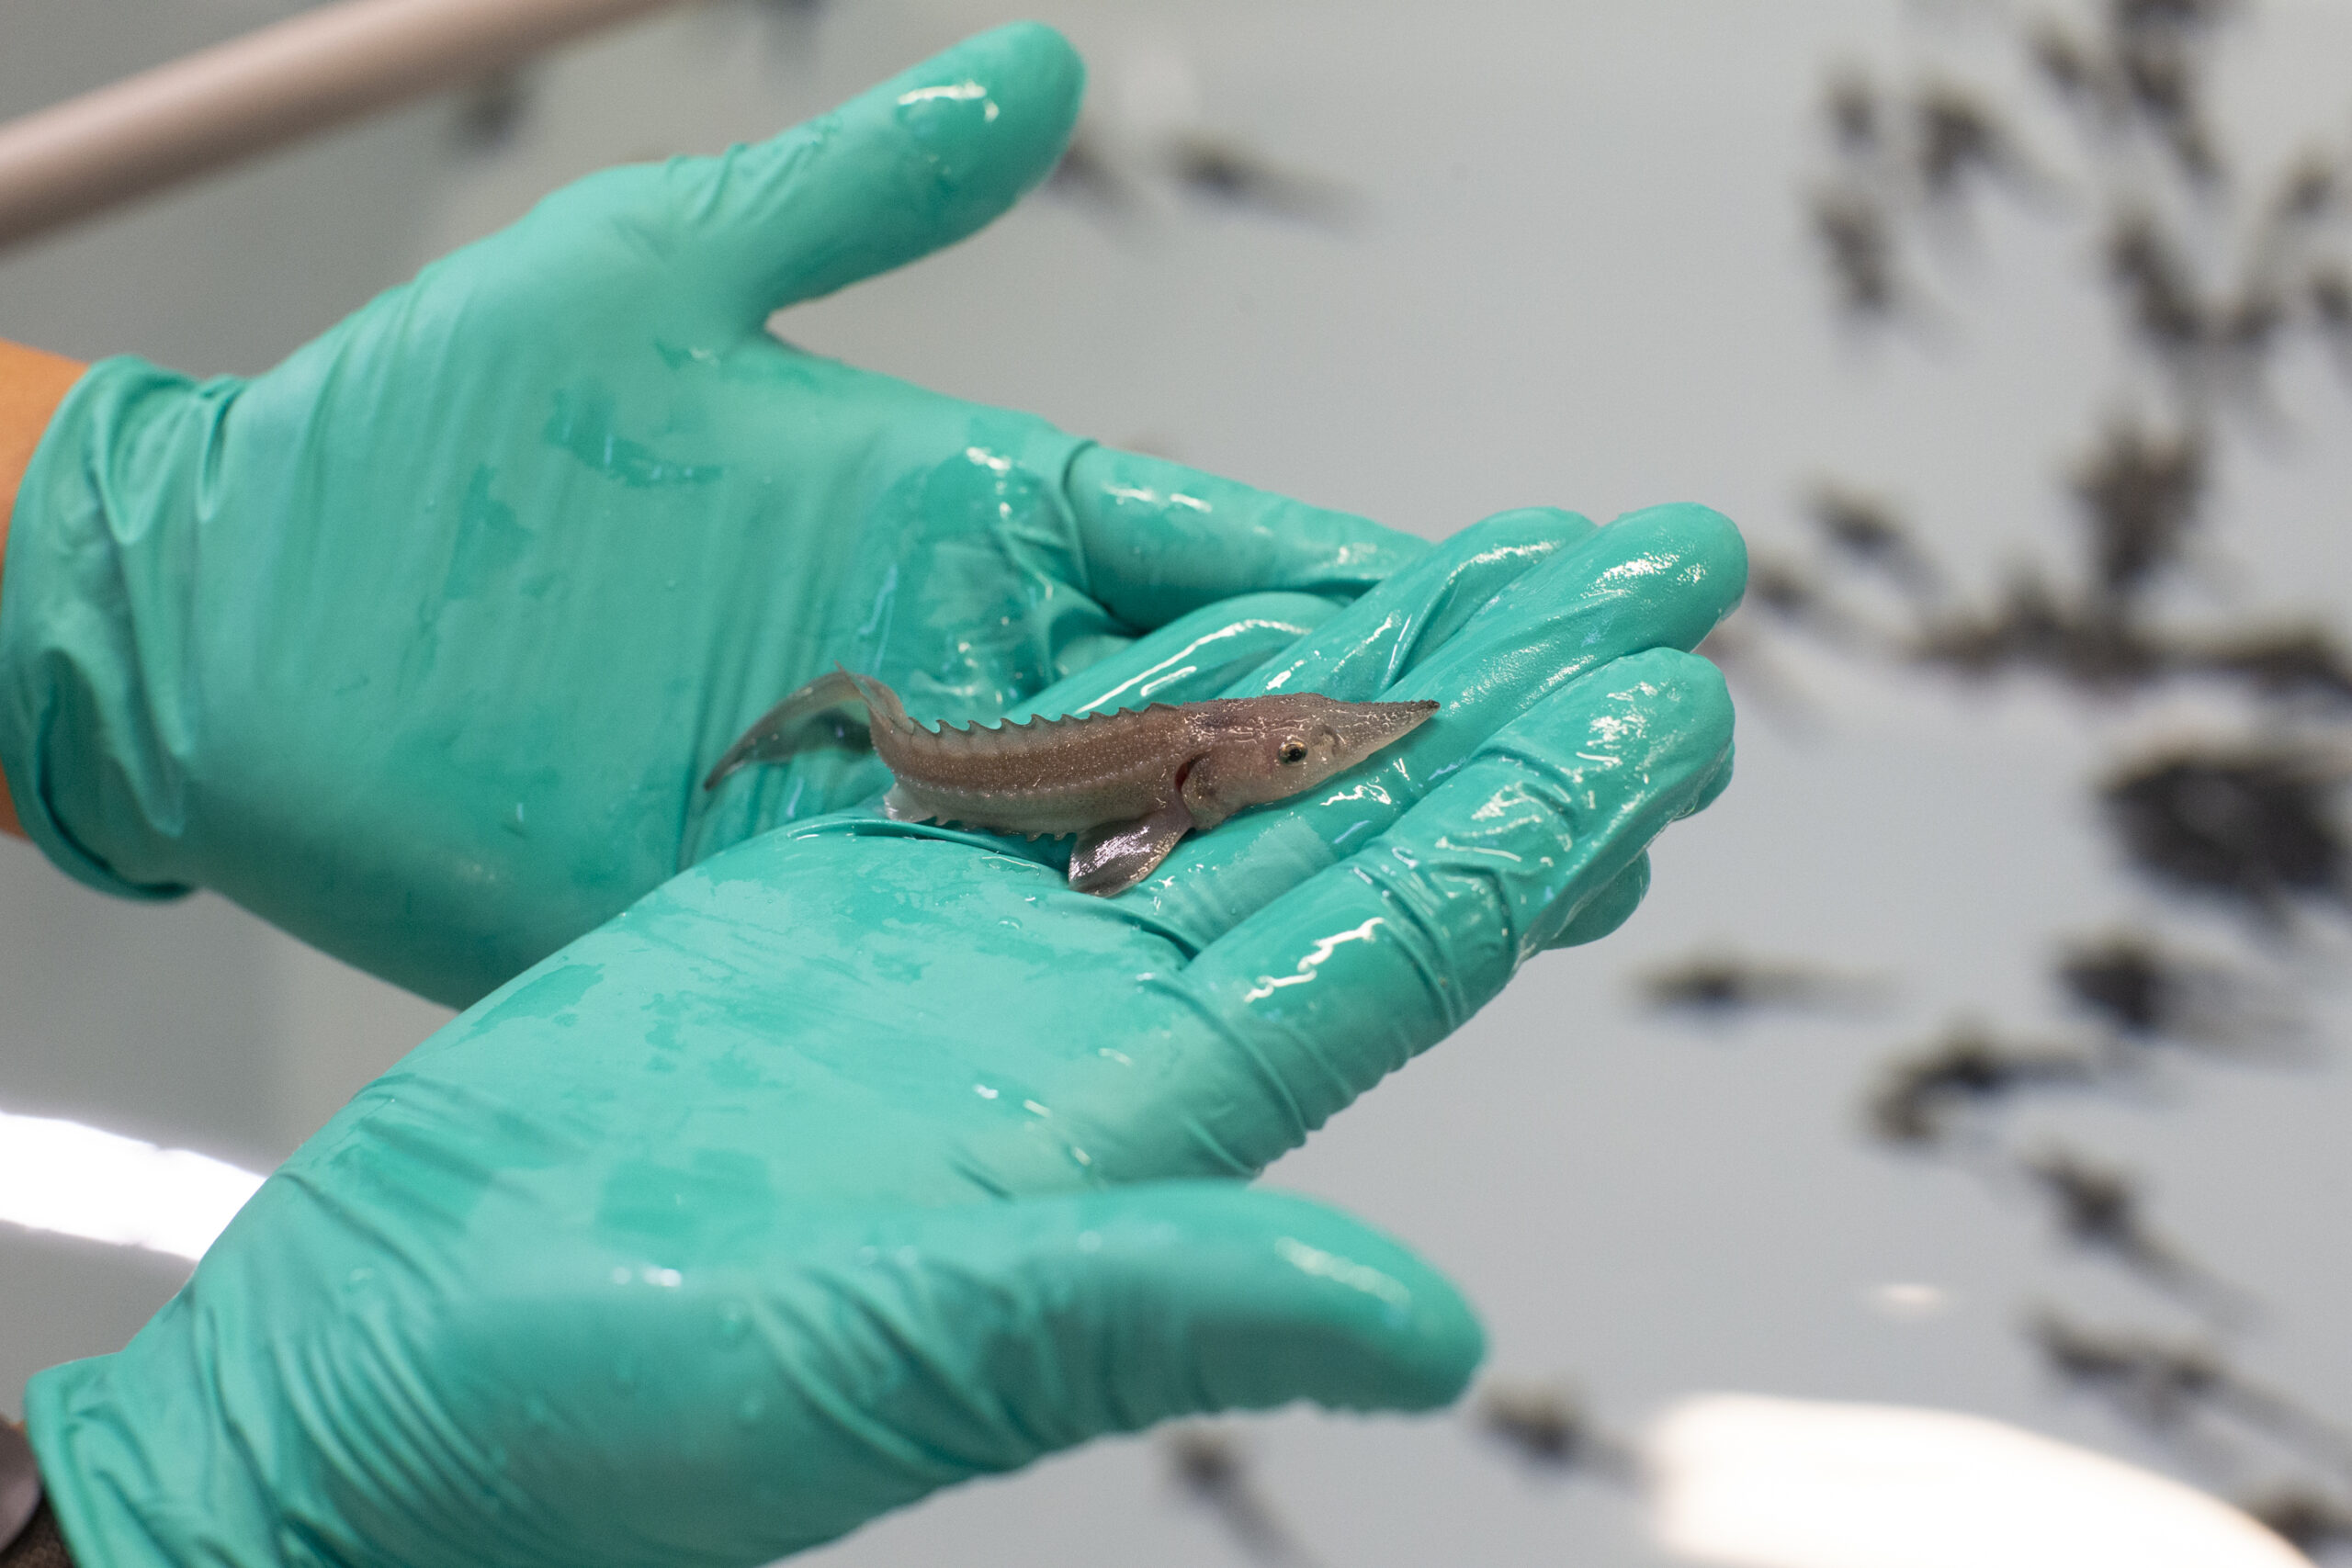 A baby sturgeon fish sits on two gloved hands